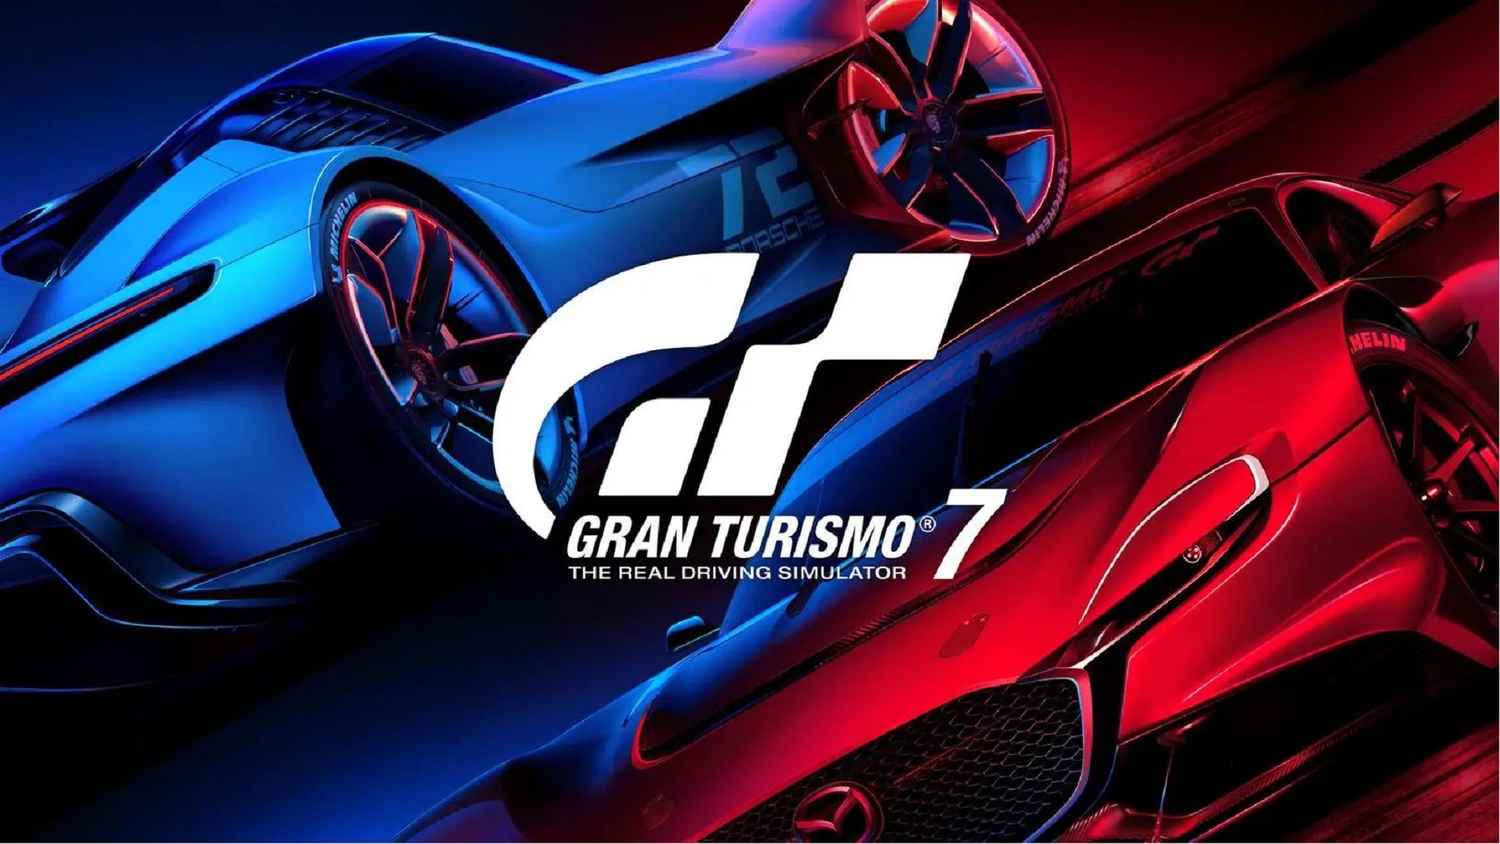 Gran Turismo trailer shows us that video game movies are here to stay